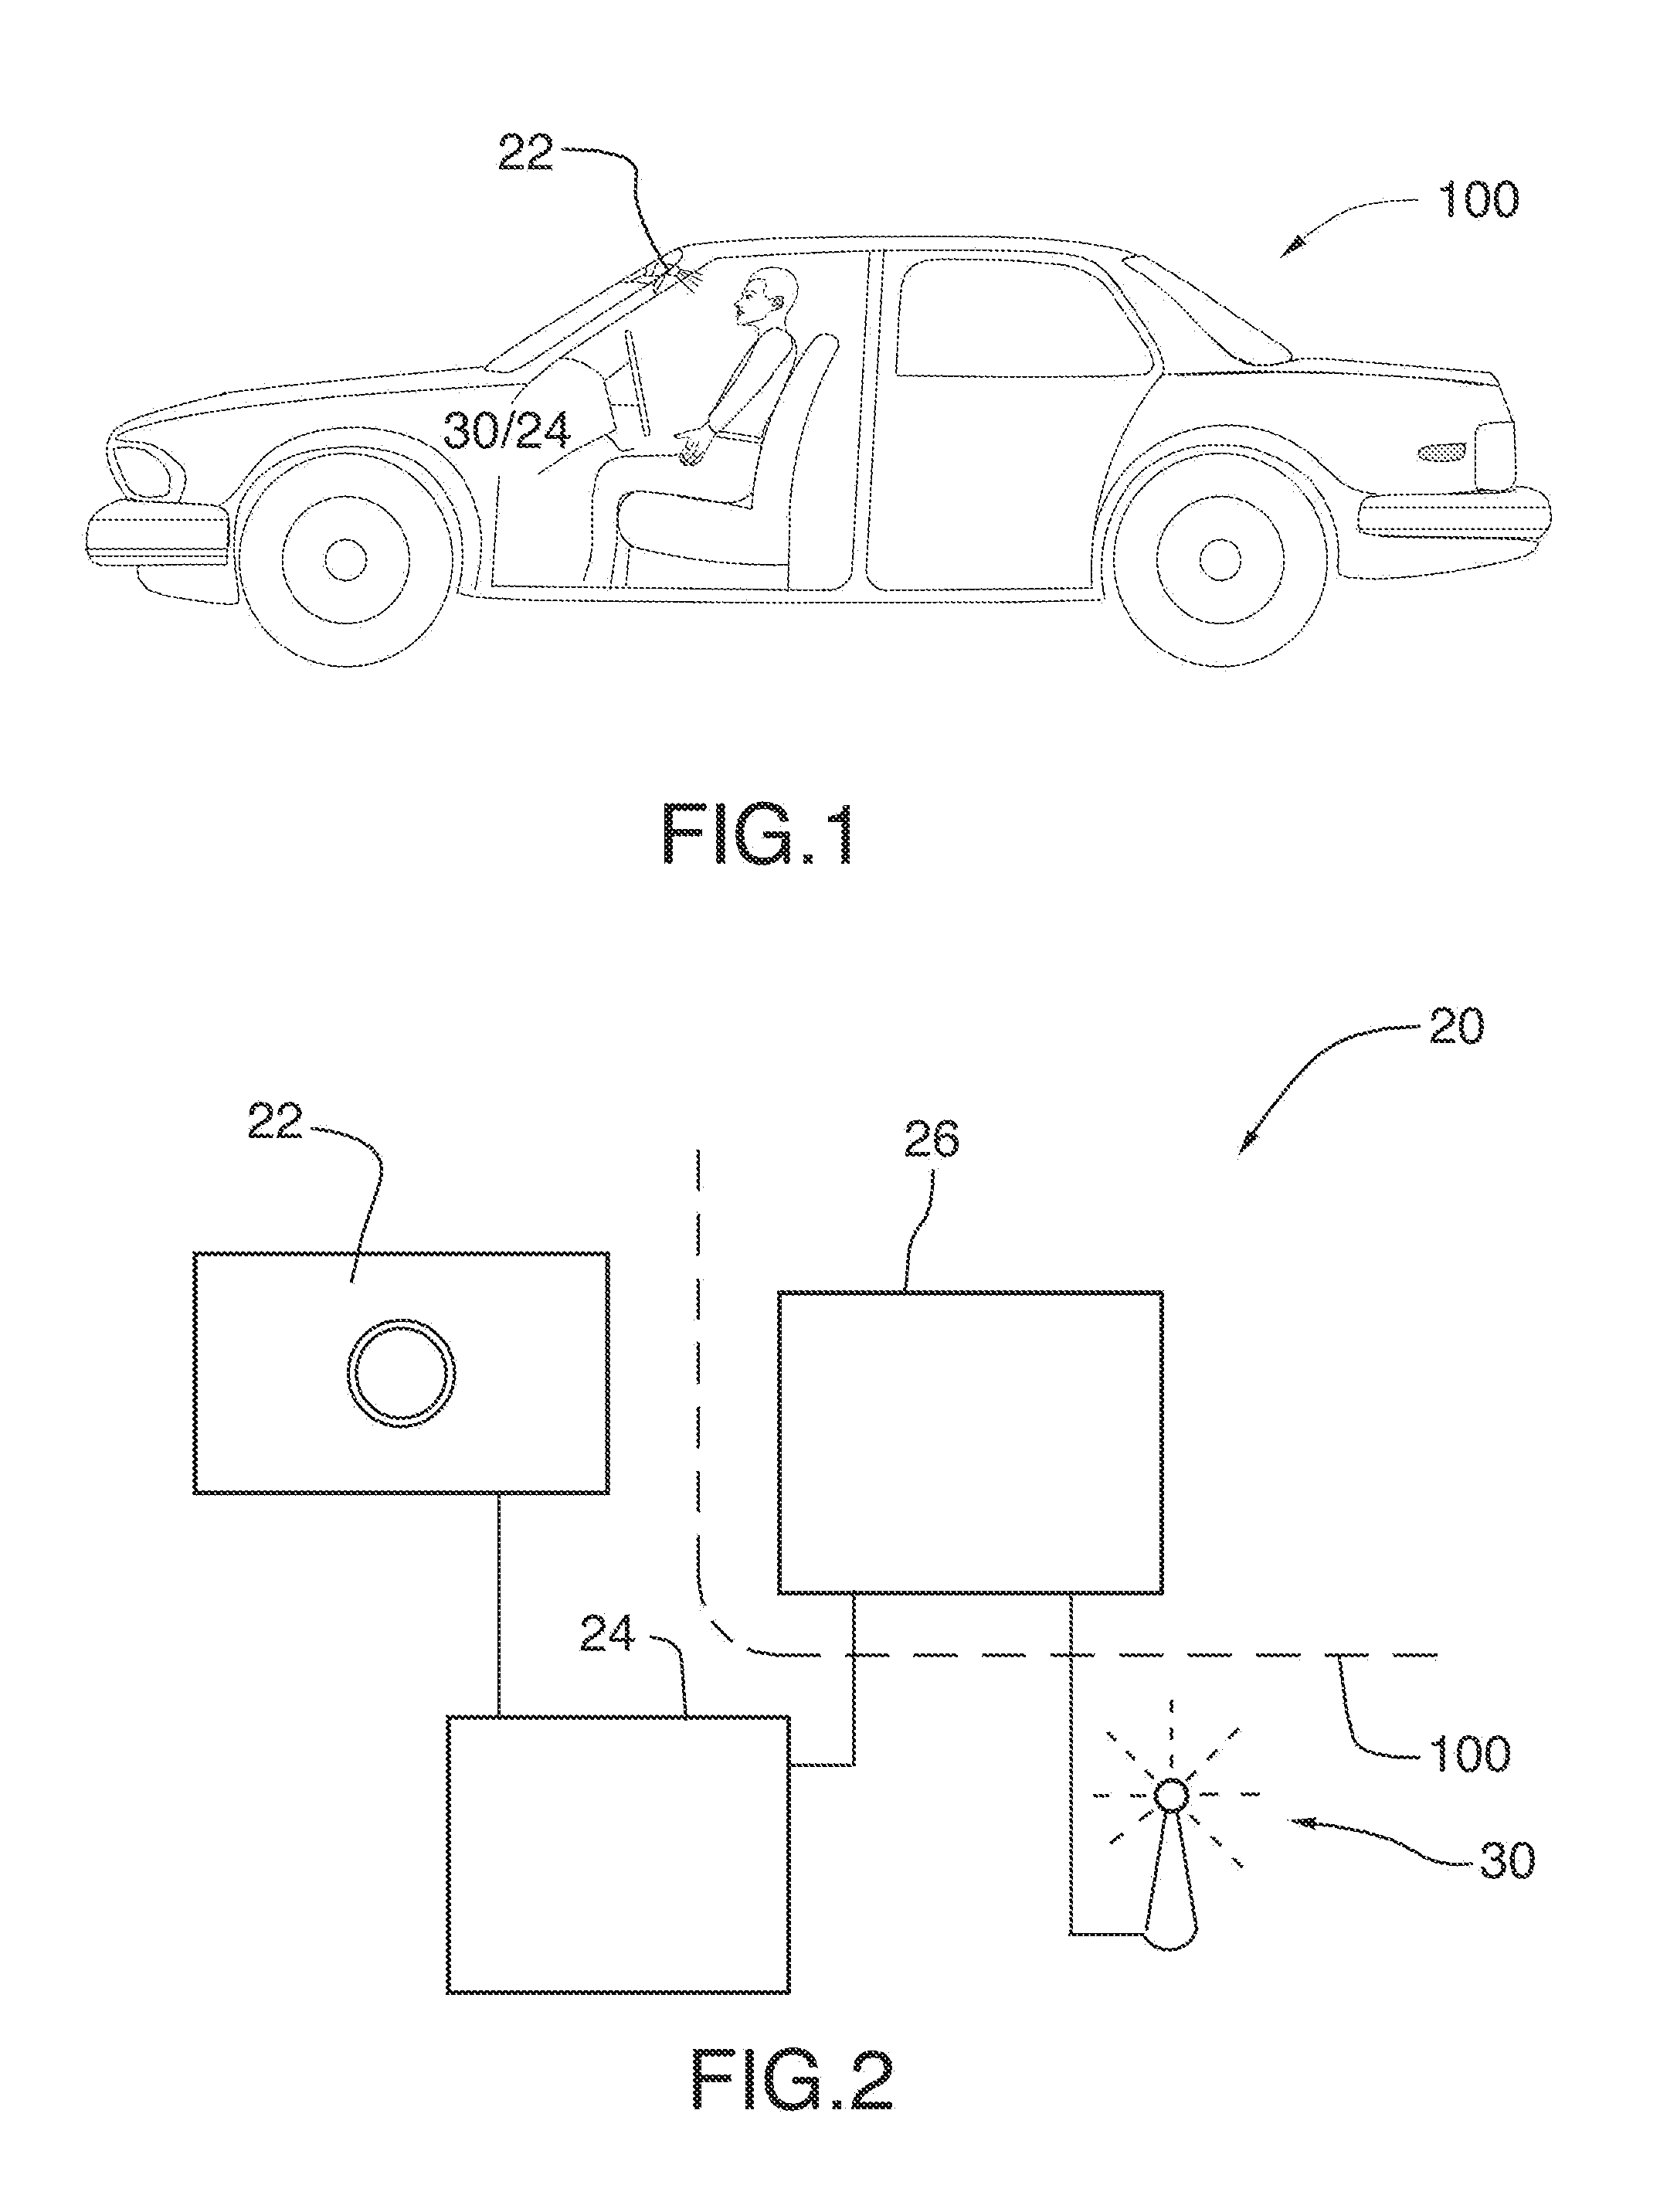 Method and apparatus for combatting distracted driving